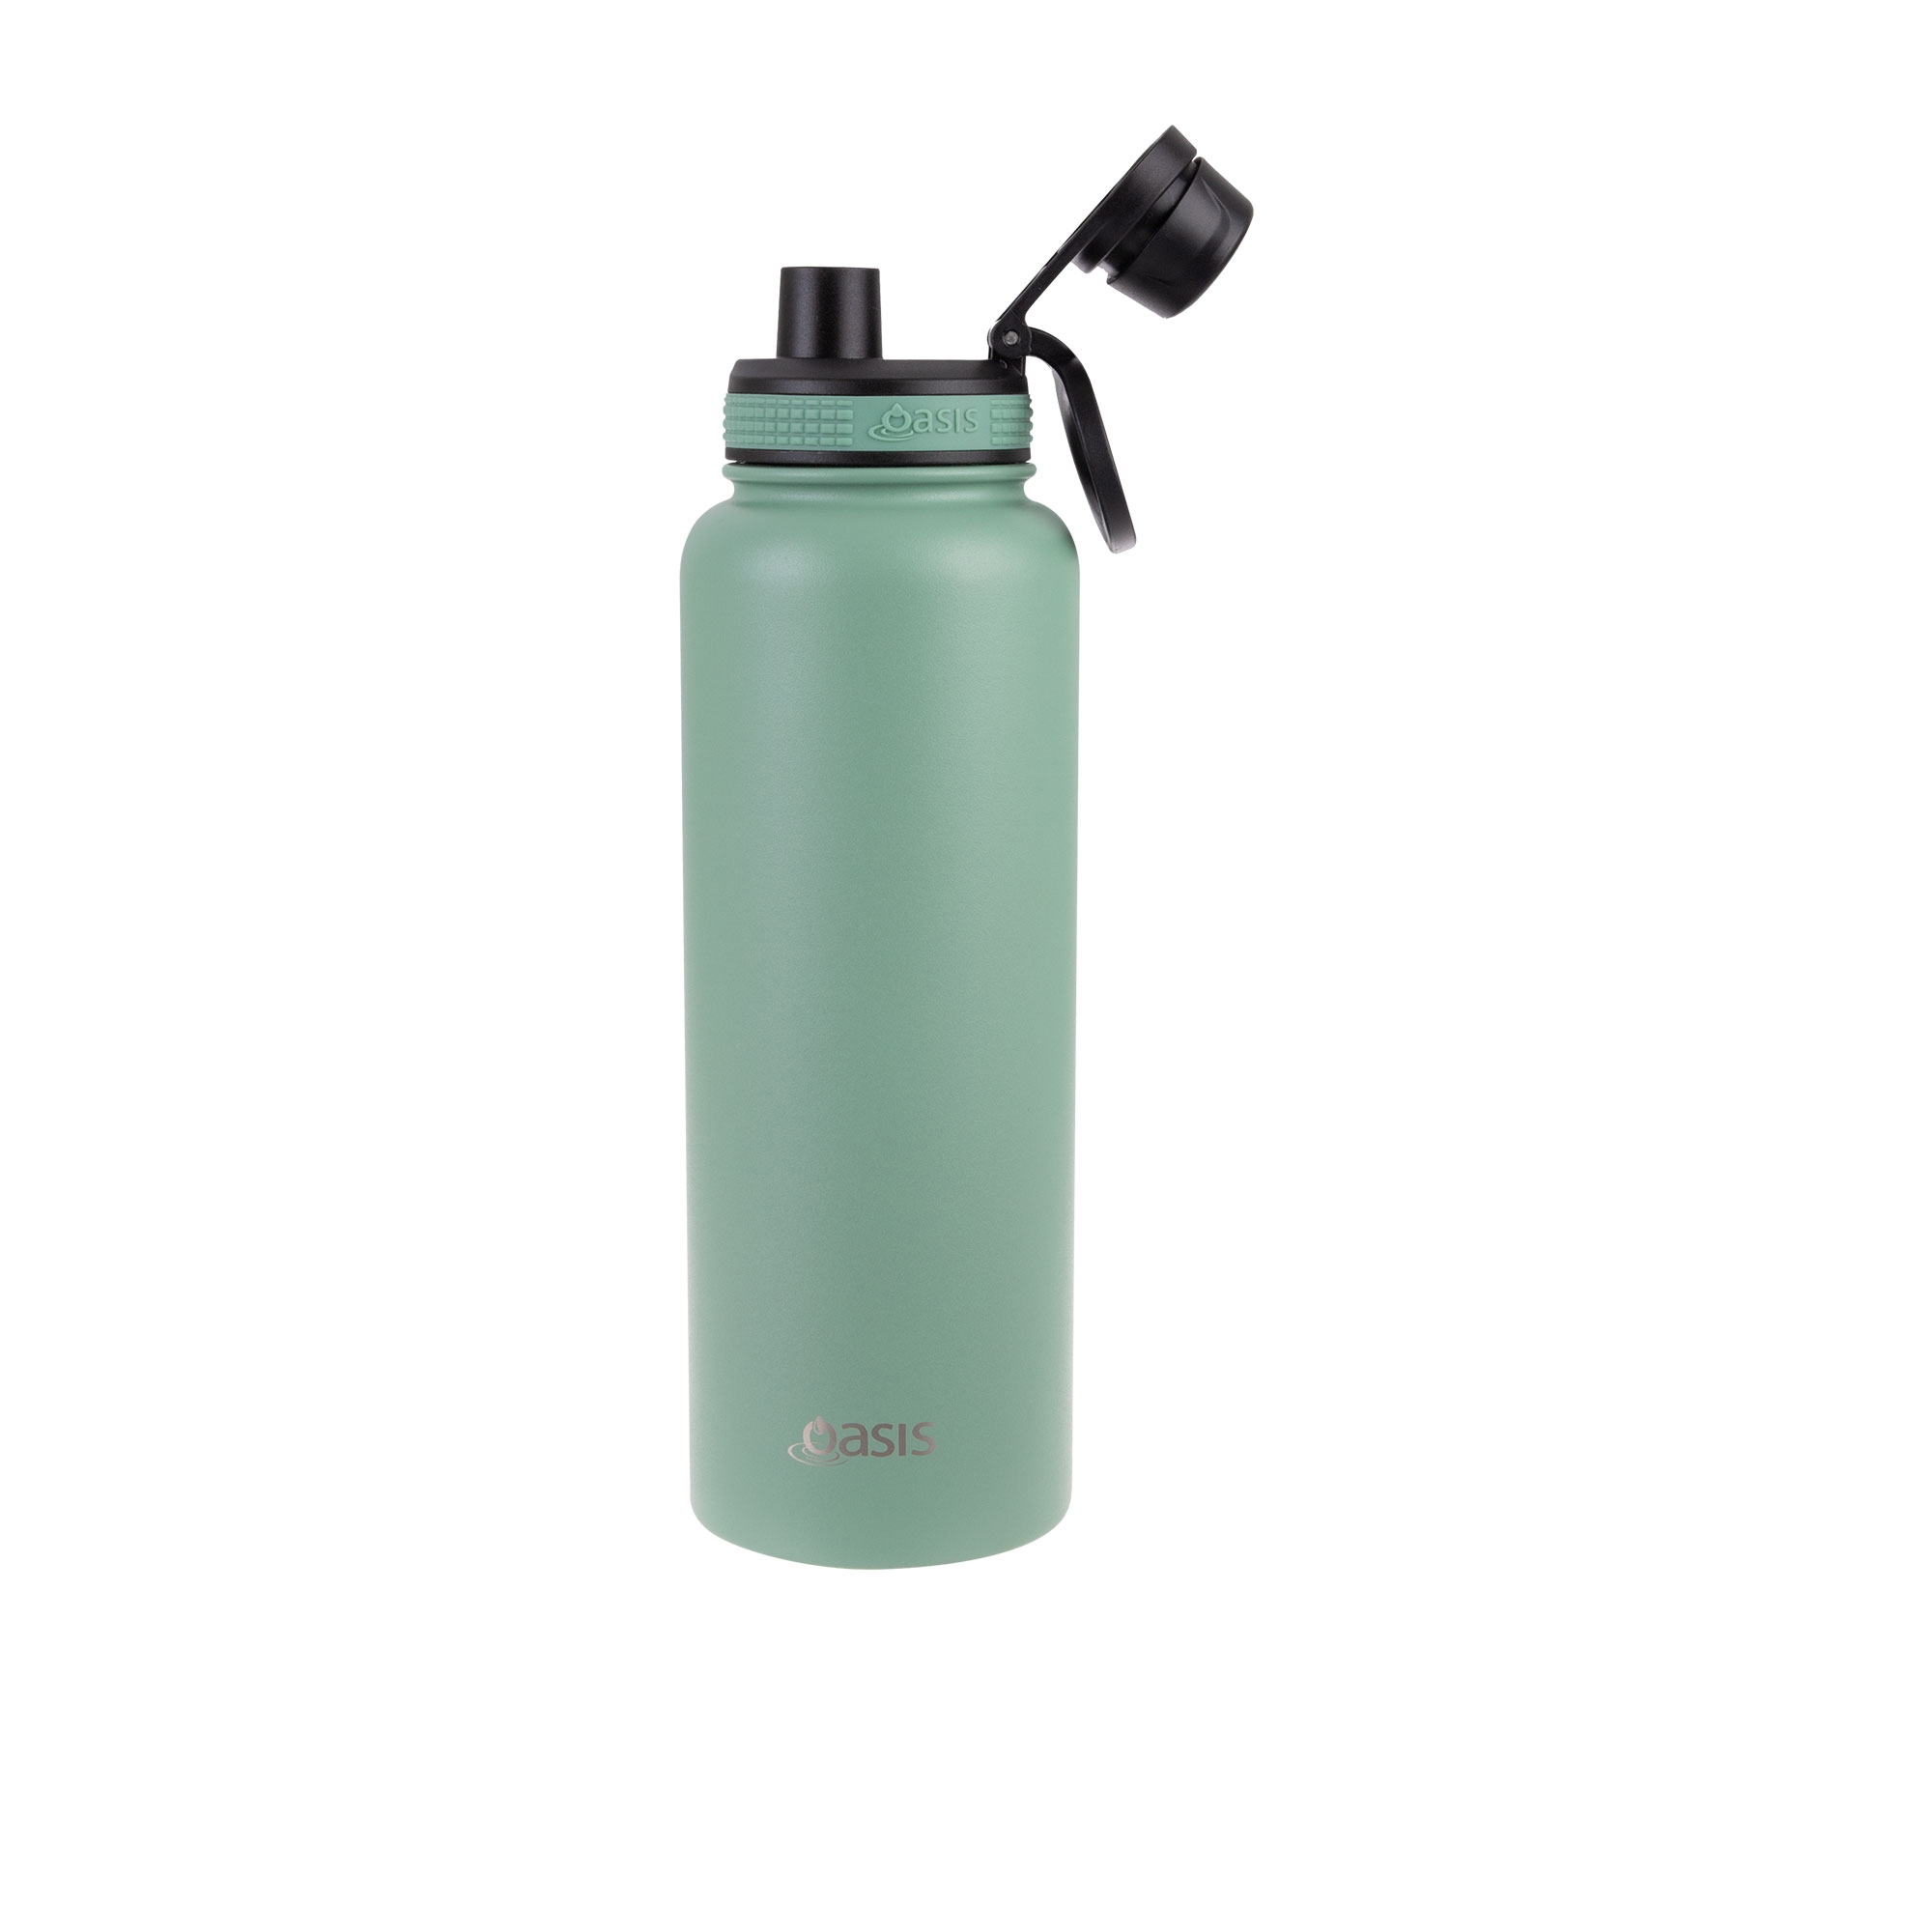 Oasis Challenger Double Wall Insulated Sports Bottle 1.1L Sage Green Image 2